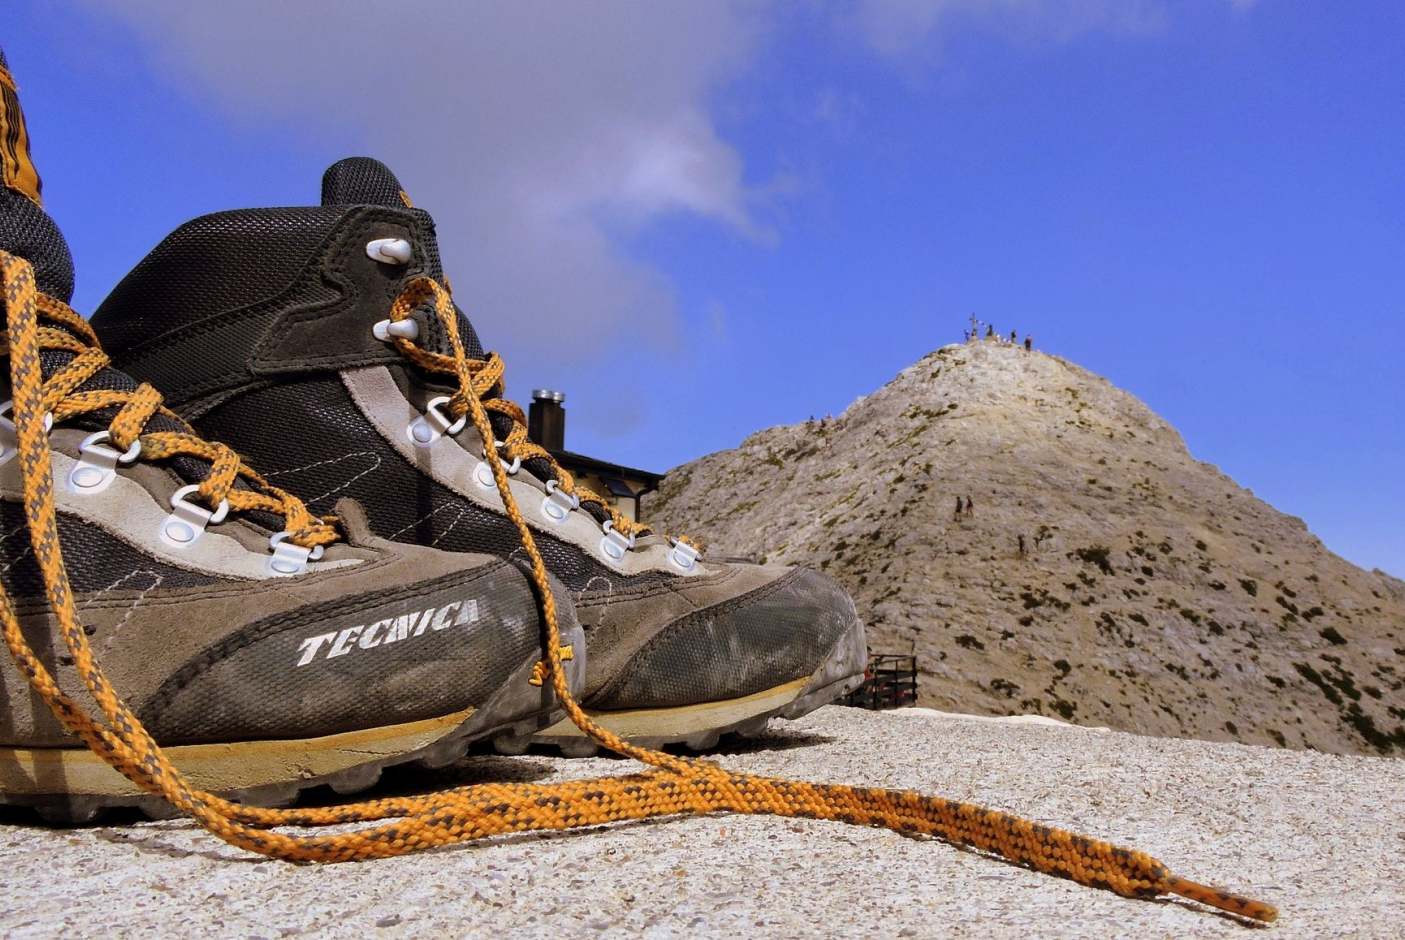 ethical hiking boots